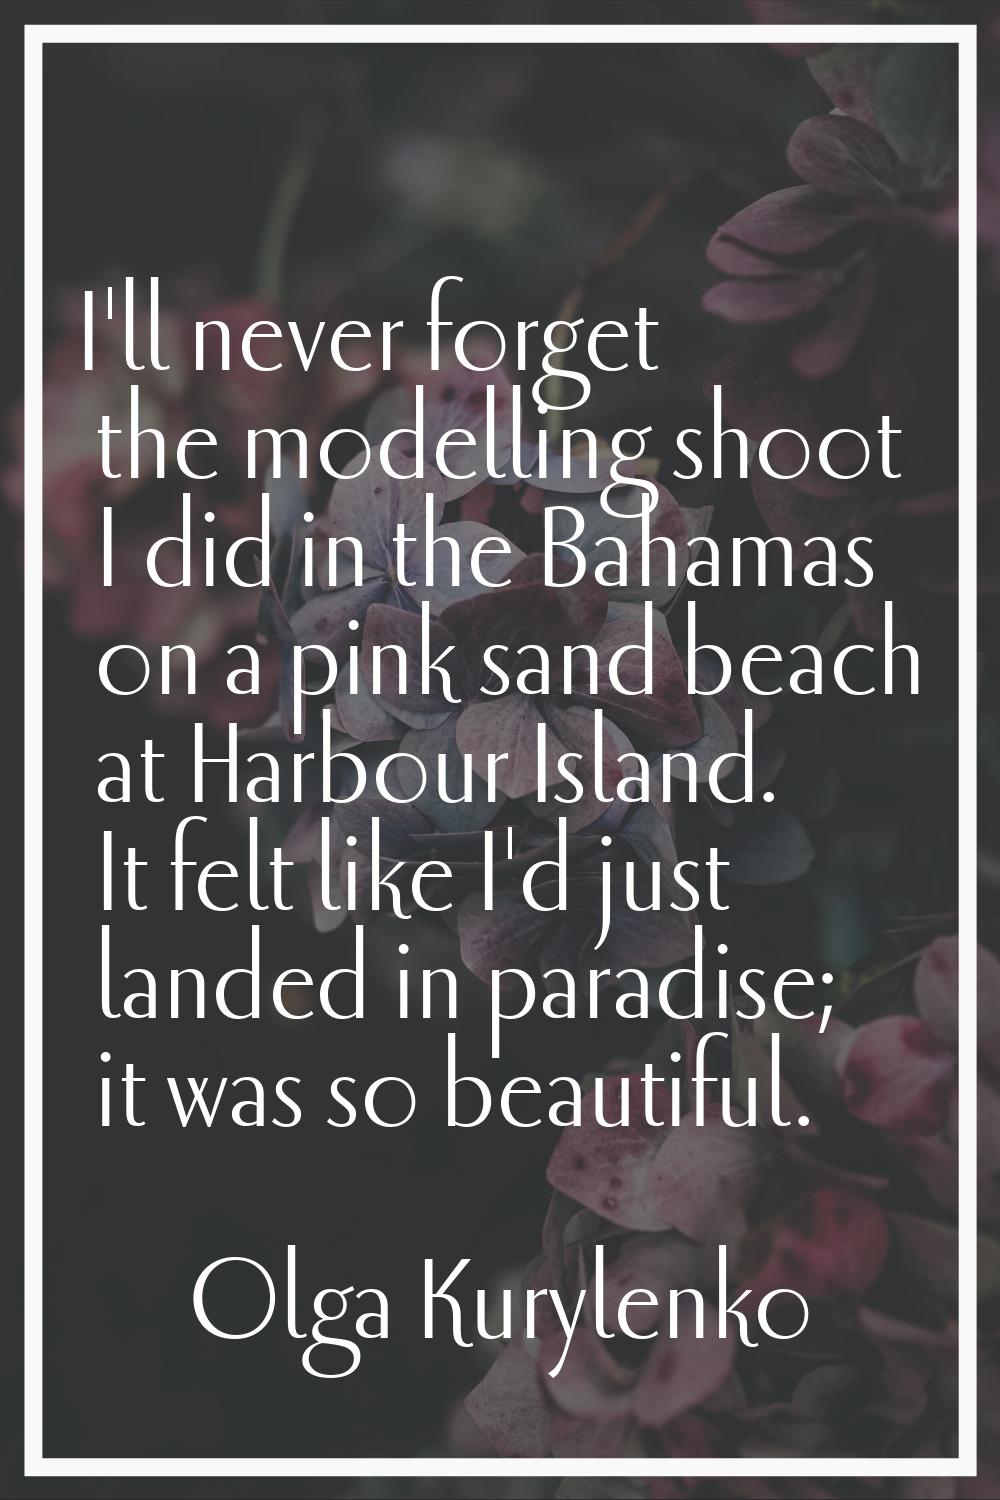 I'll never forget the modelling shoot I did in the Bahamas on a pink sand beach at Harbour Island. 